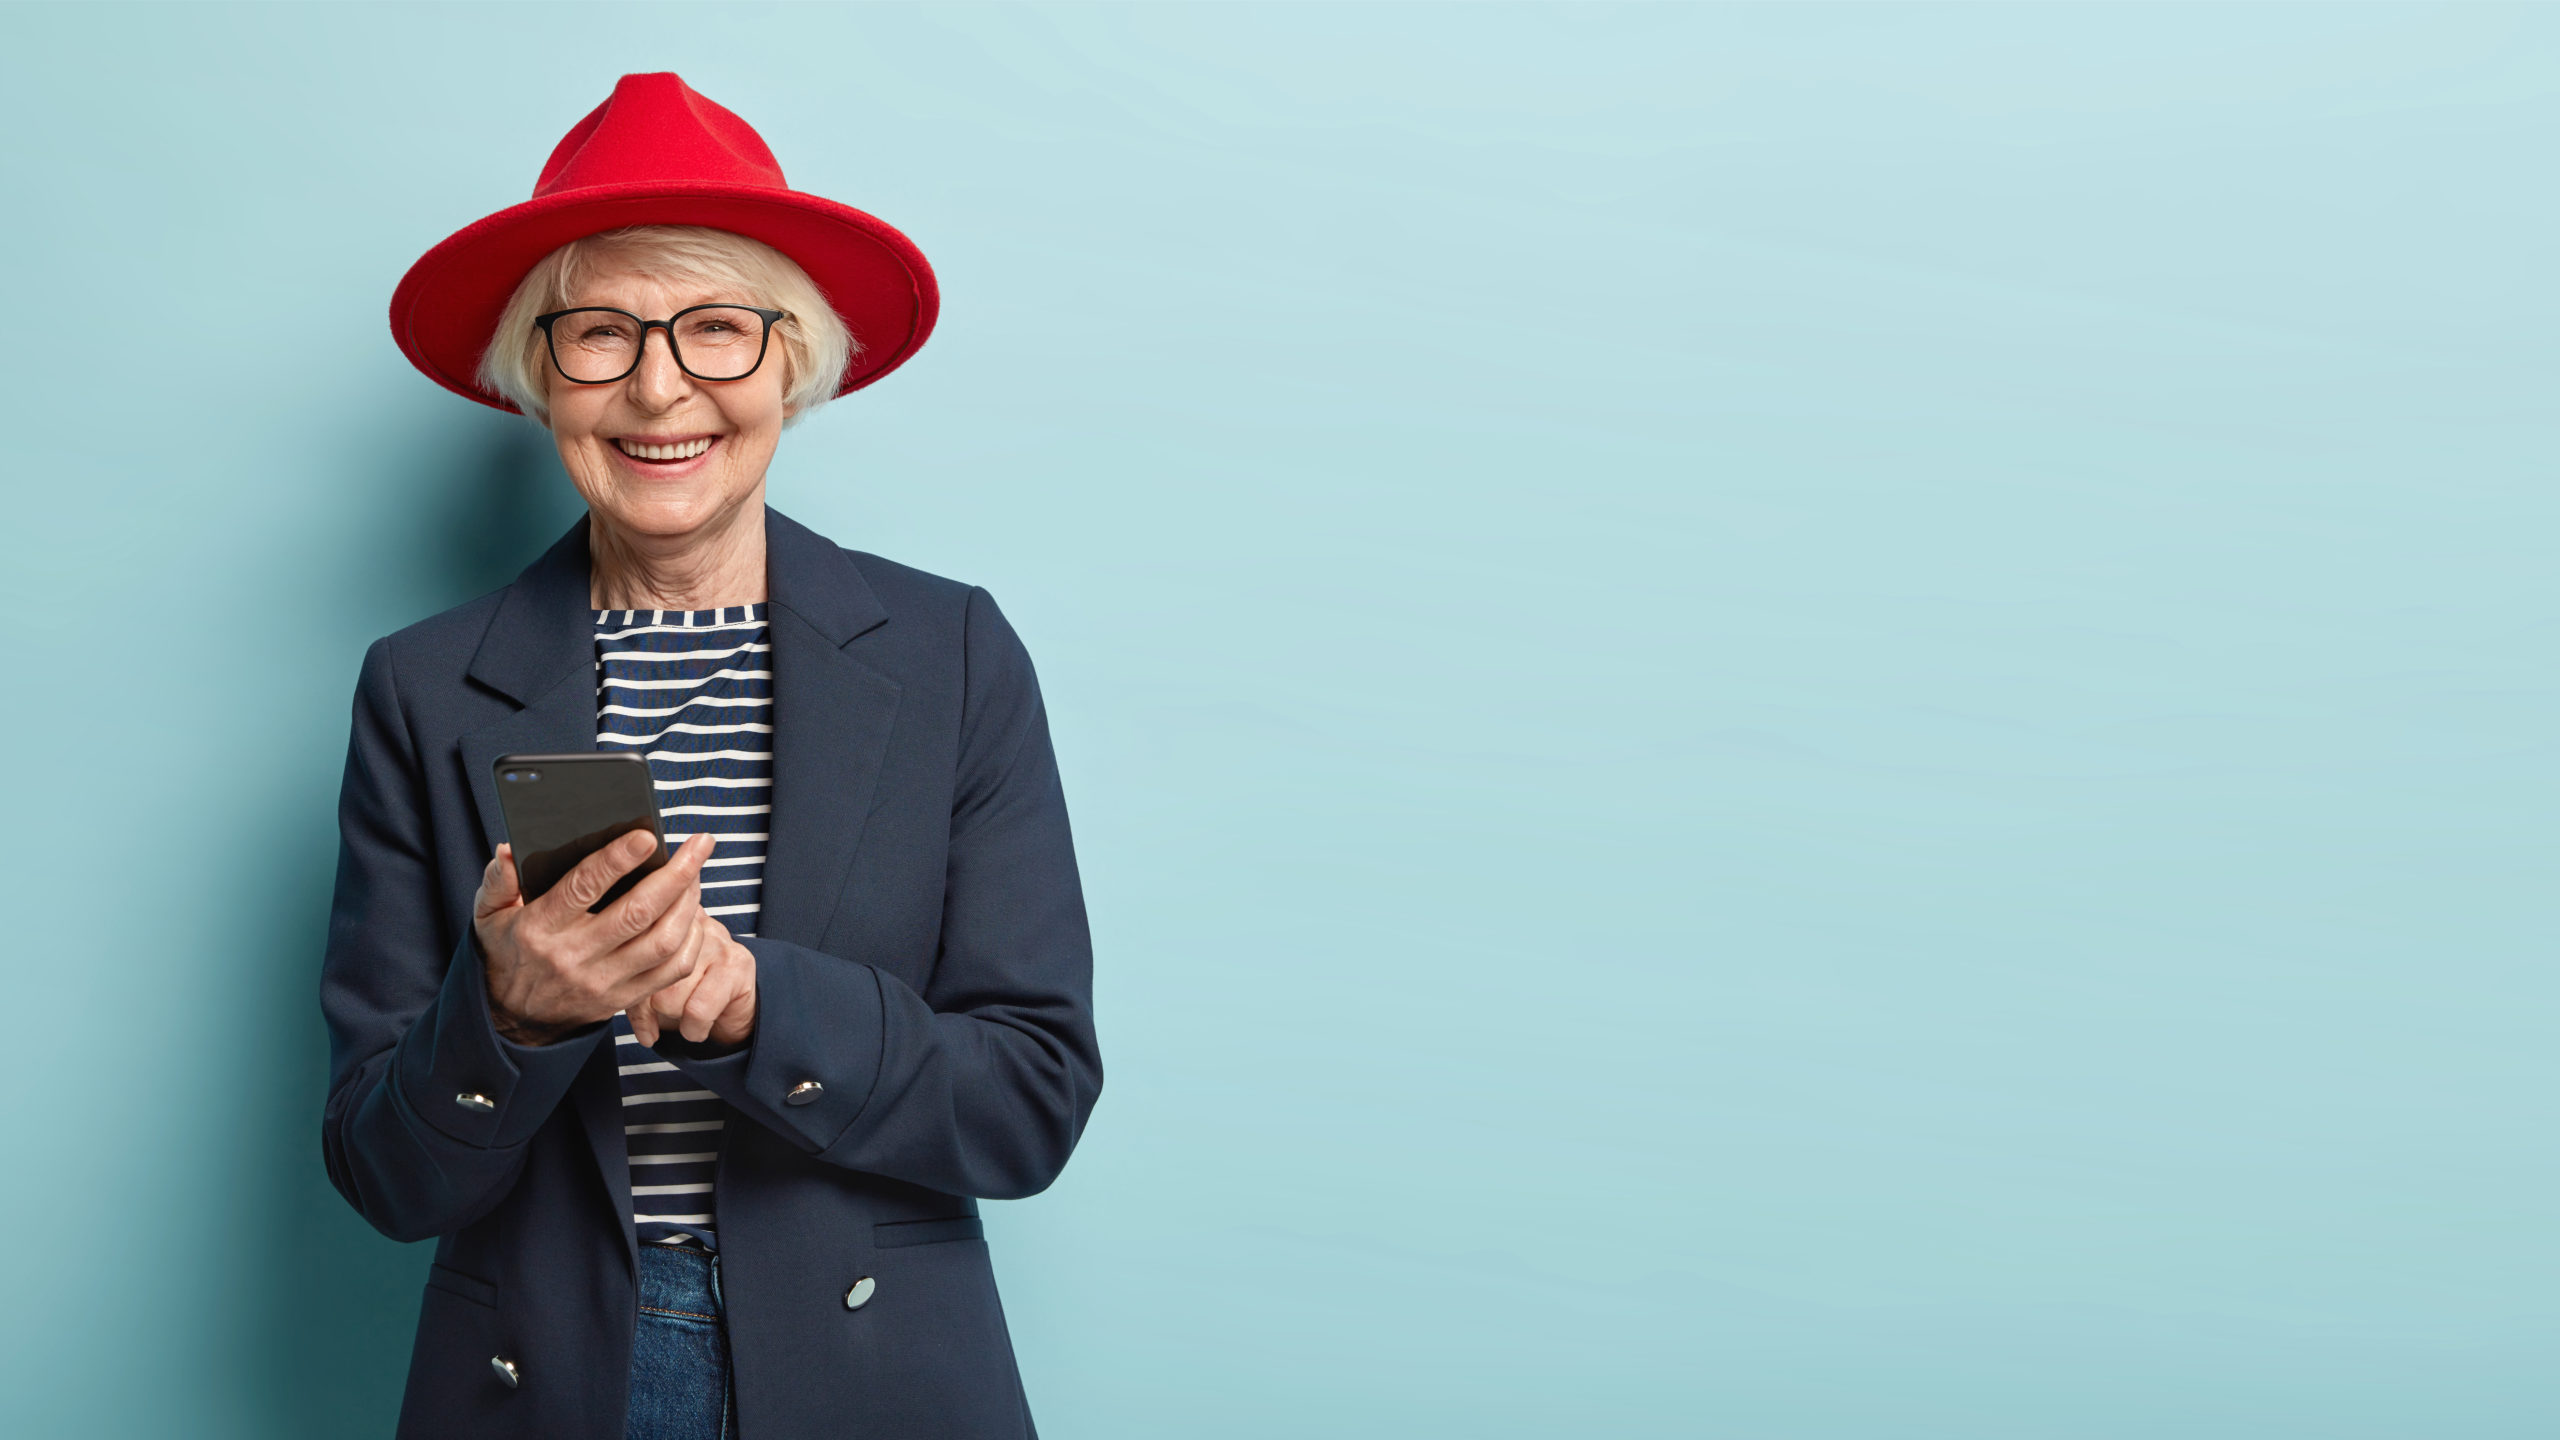 Overjoyed senior lady in stylish apparel and hat chats with friends online, happy to learn using modern gadgets, being advanced user of cell phone, spends leisure time at home, stands indoor alone